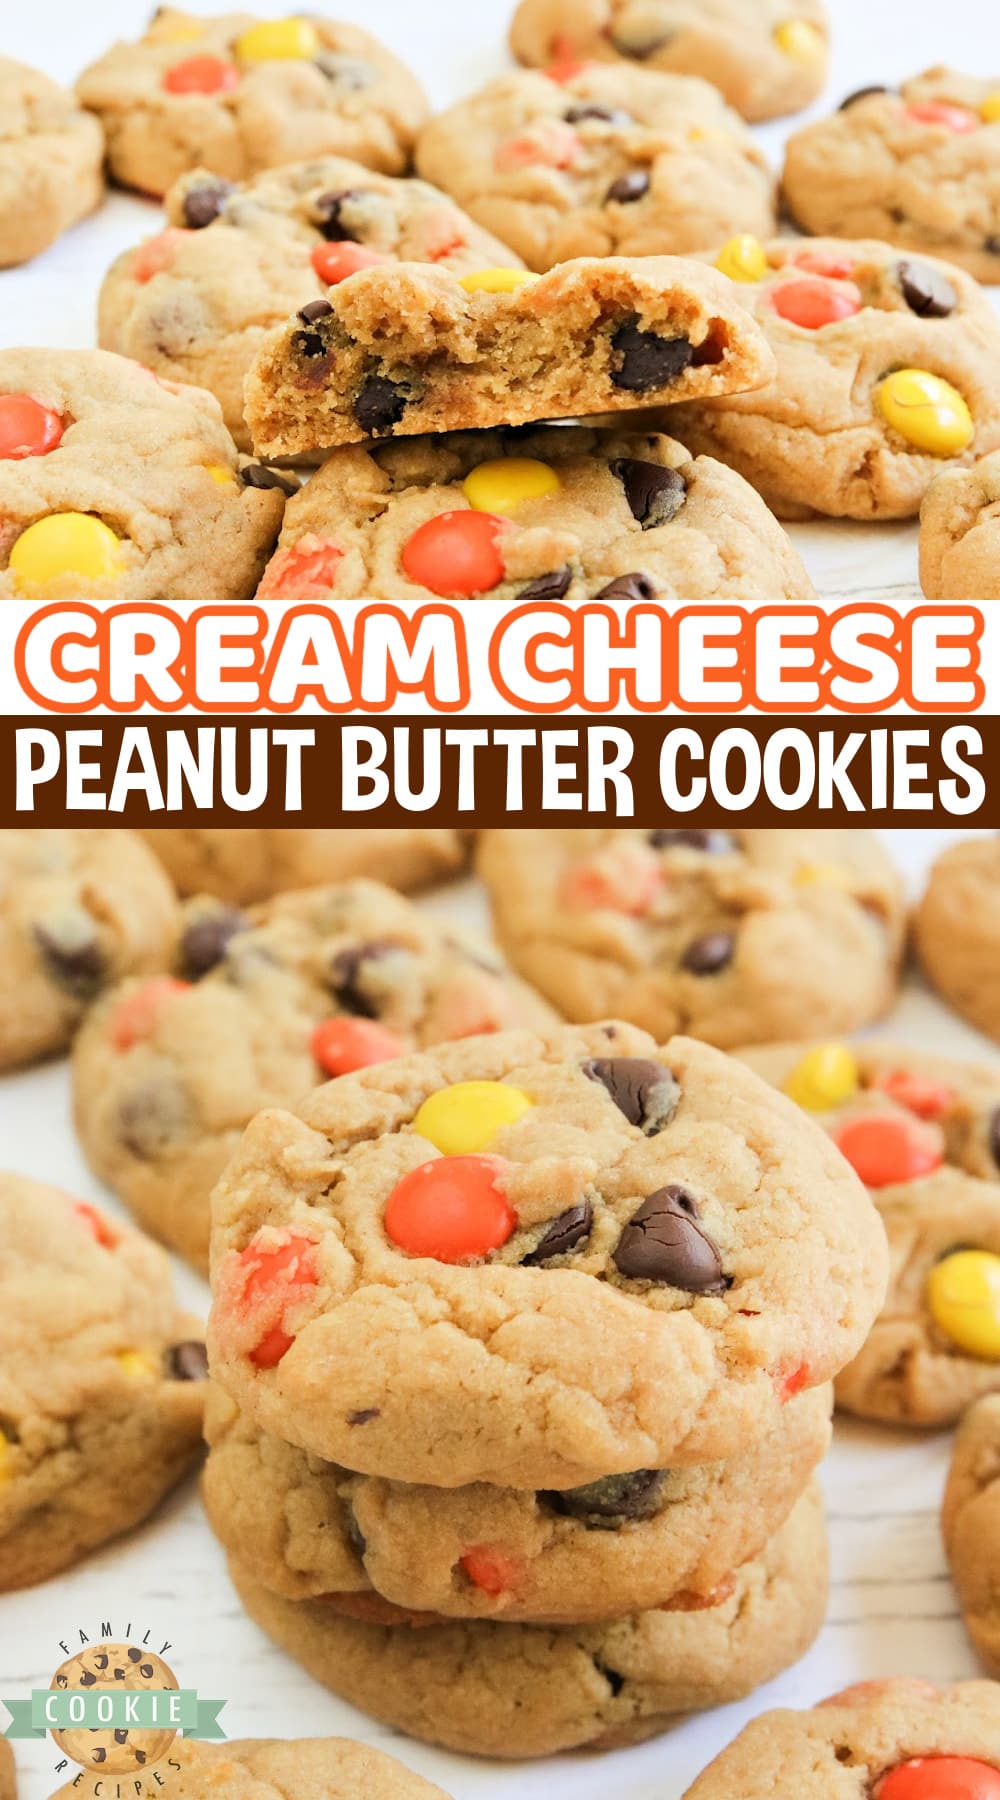 Cream Cheese Peanut Butter Cookies are soft, chewy and packed with peanut butter! Made with Reese's pieces, these peanut butter cookies turn out perfectly every time.